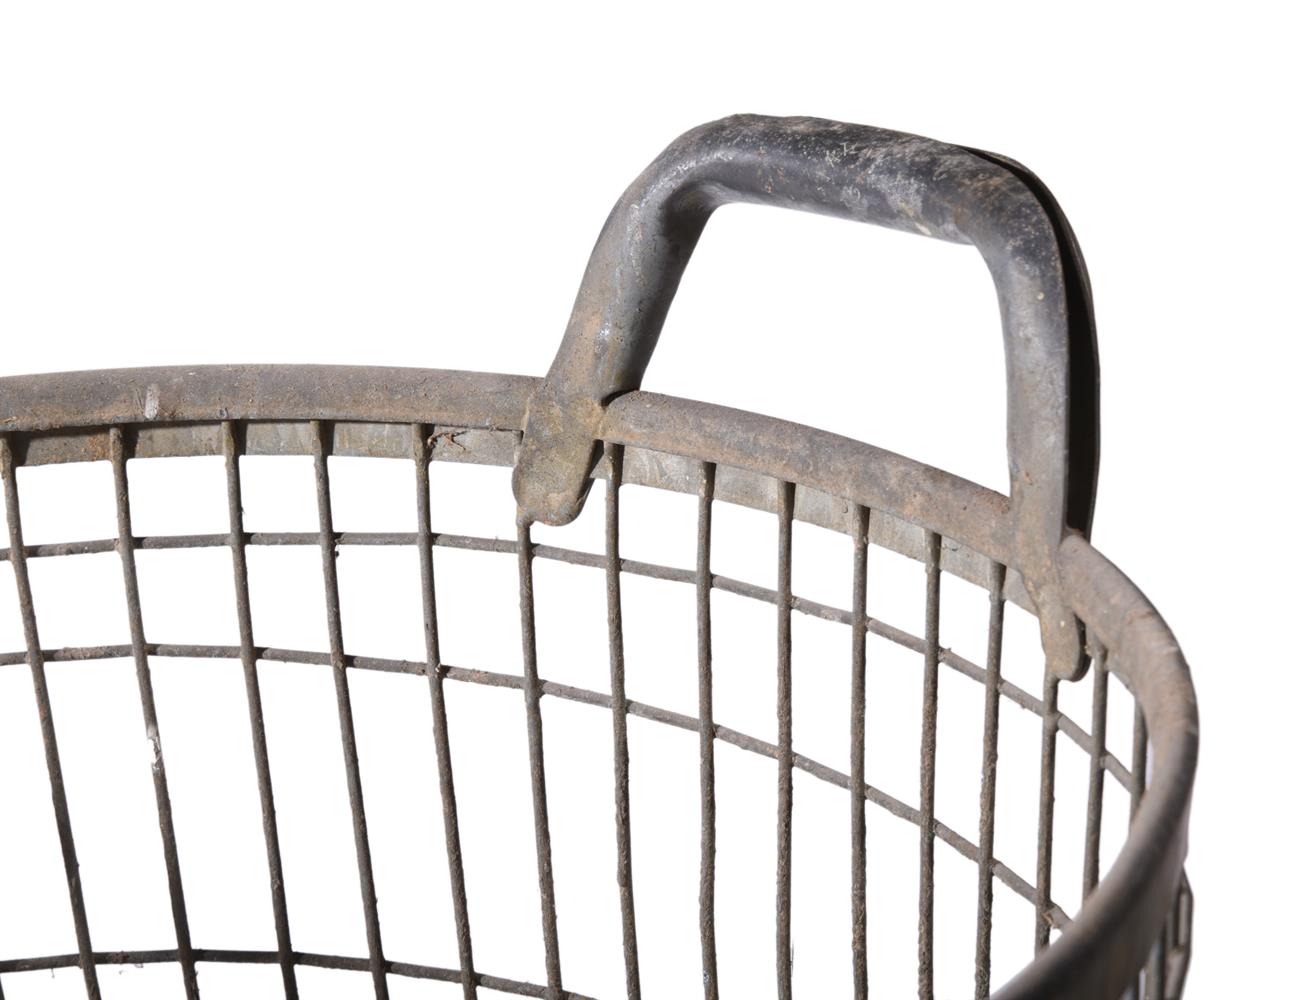 A PAIR OF GALVANISED METAL TWIN HANDLED BASKETS, 20TH CENTURY - Image 2 of 3